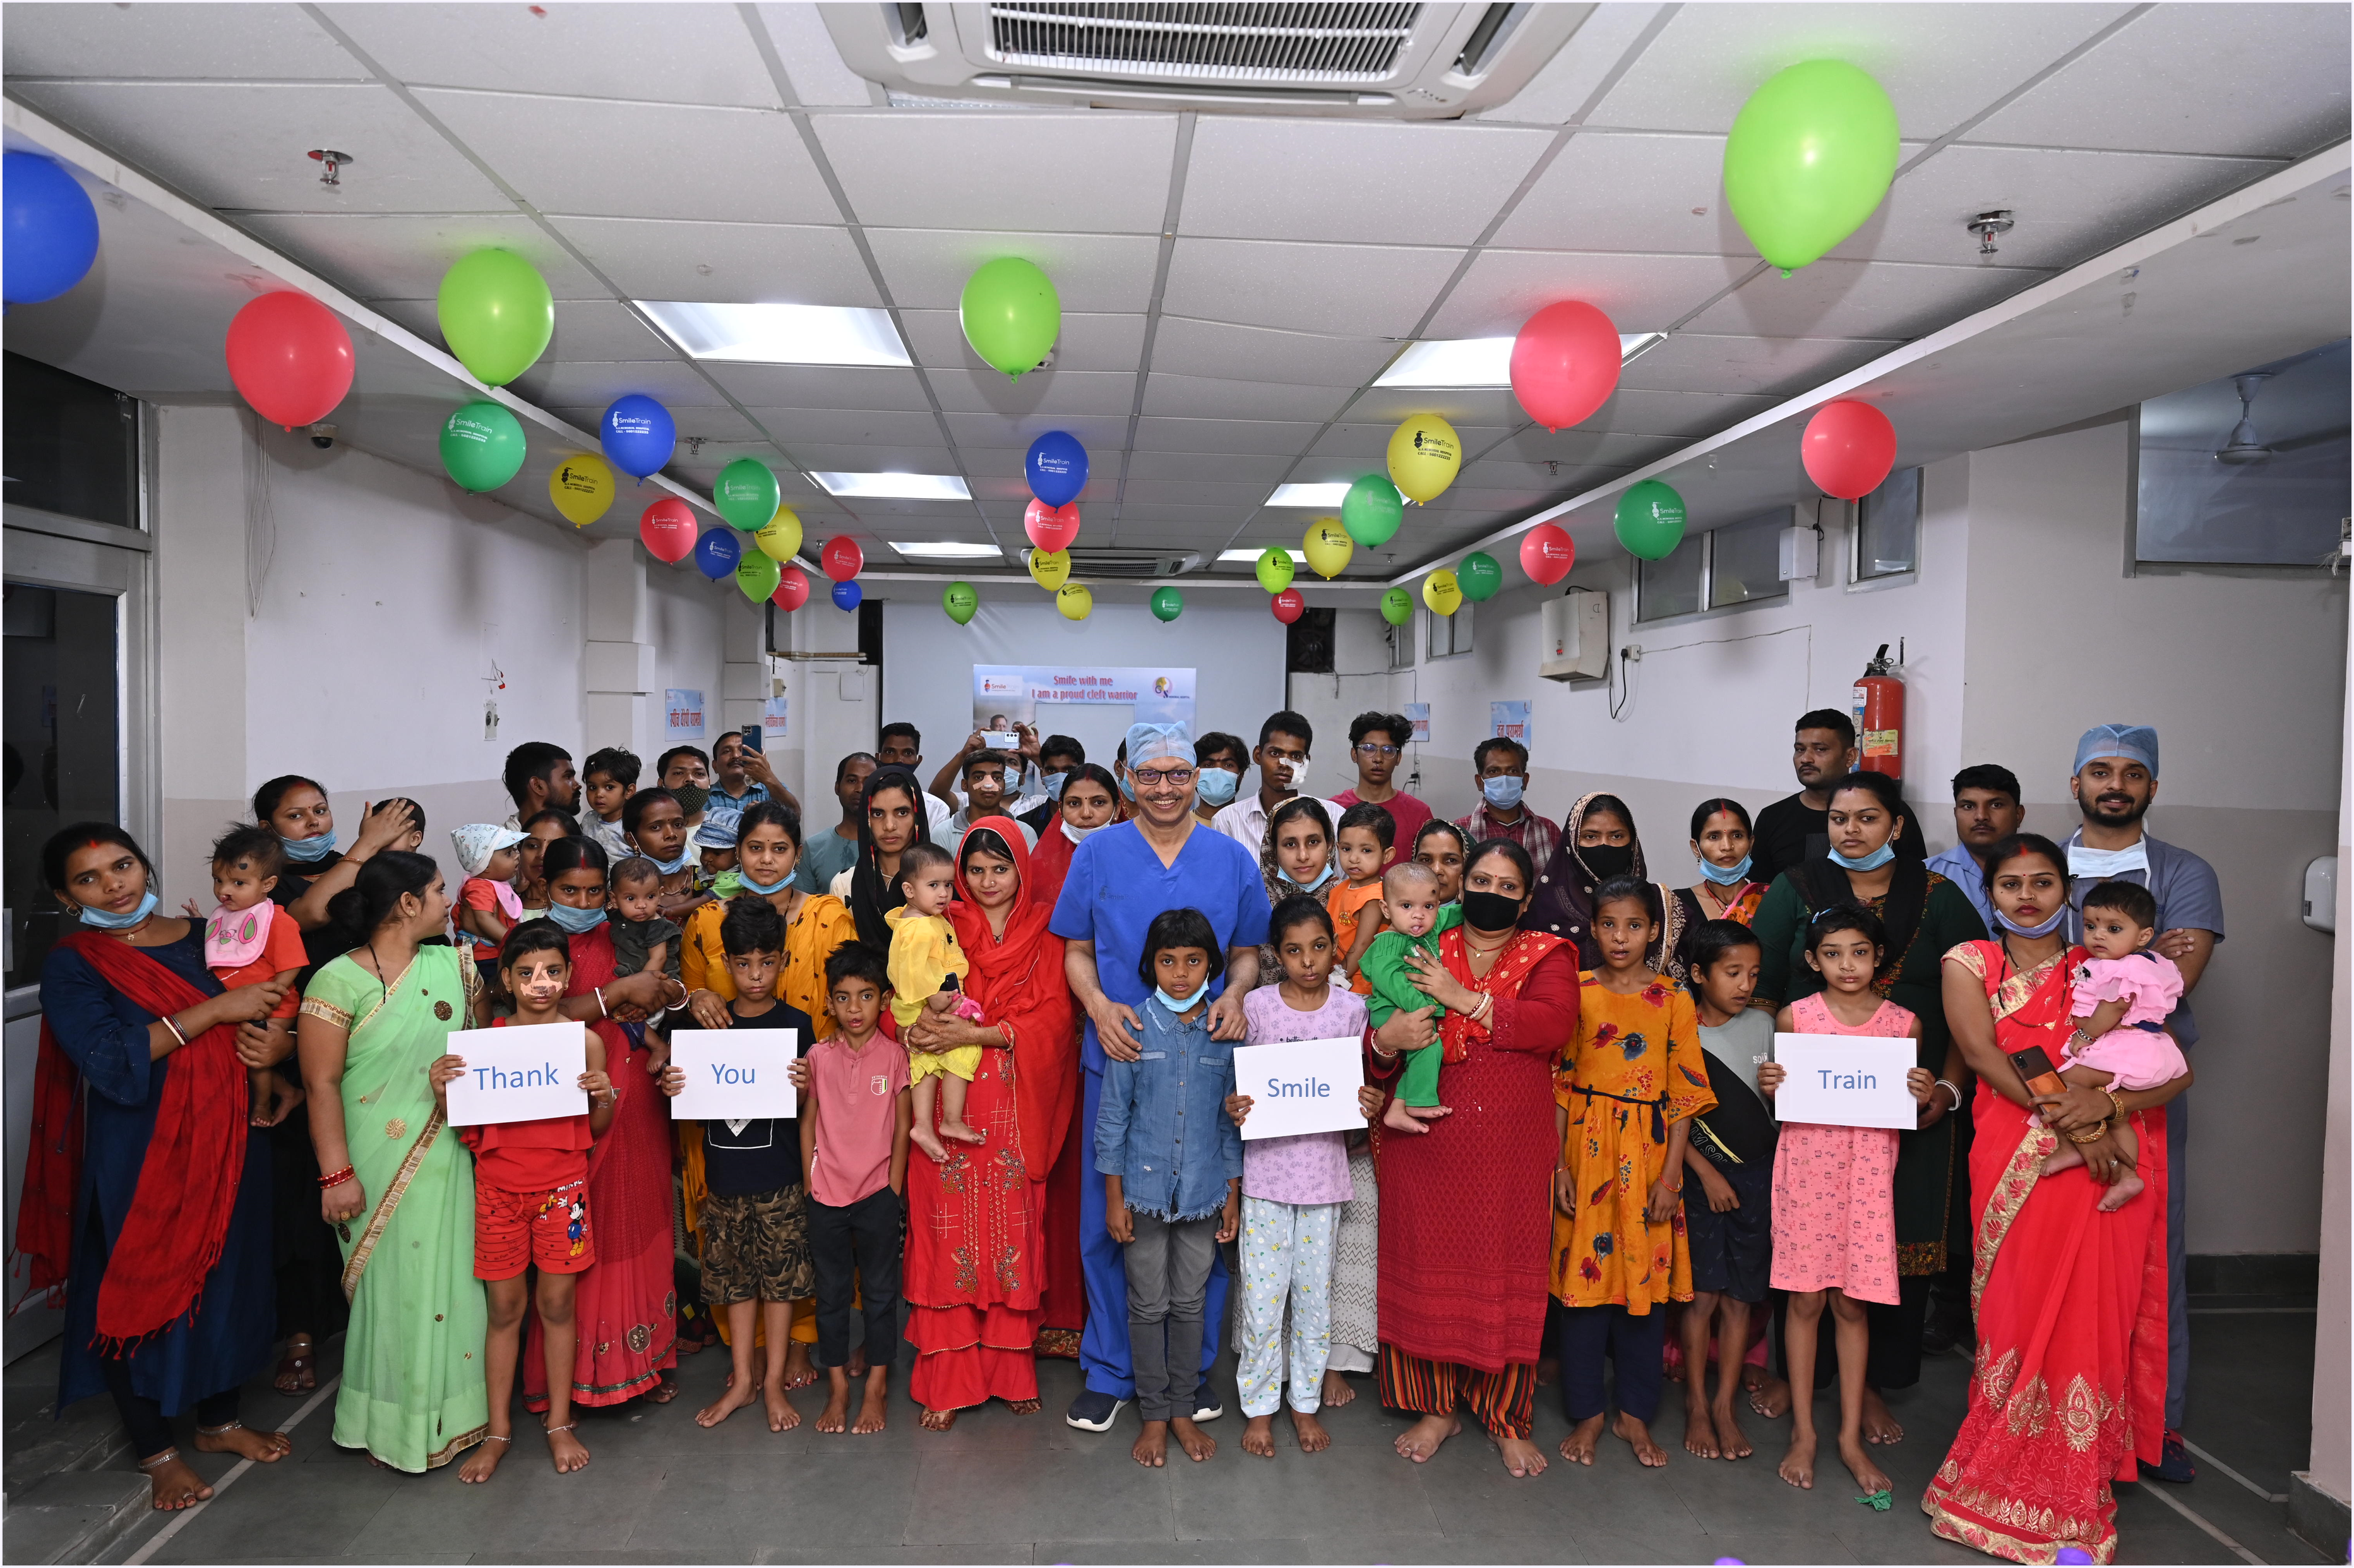 Dr Subodh smiling with his patients and holding Thank You signs